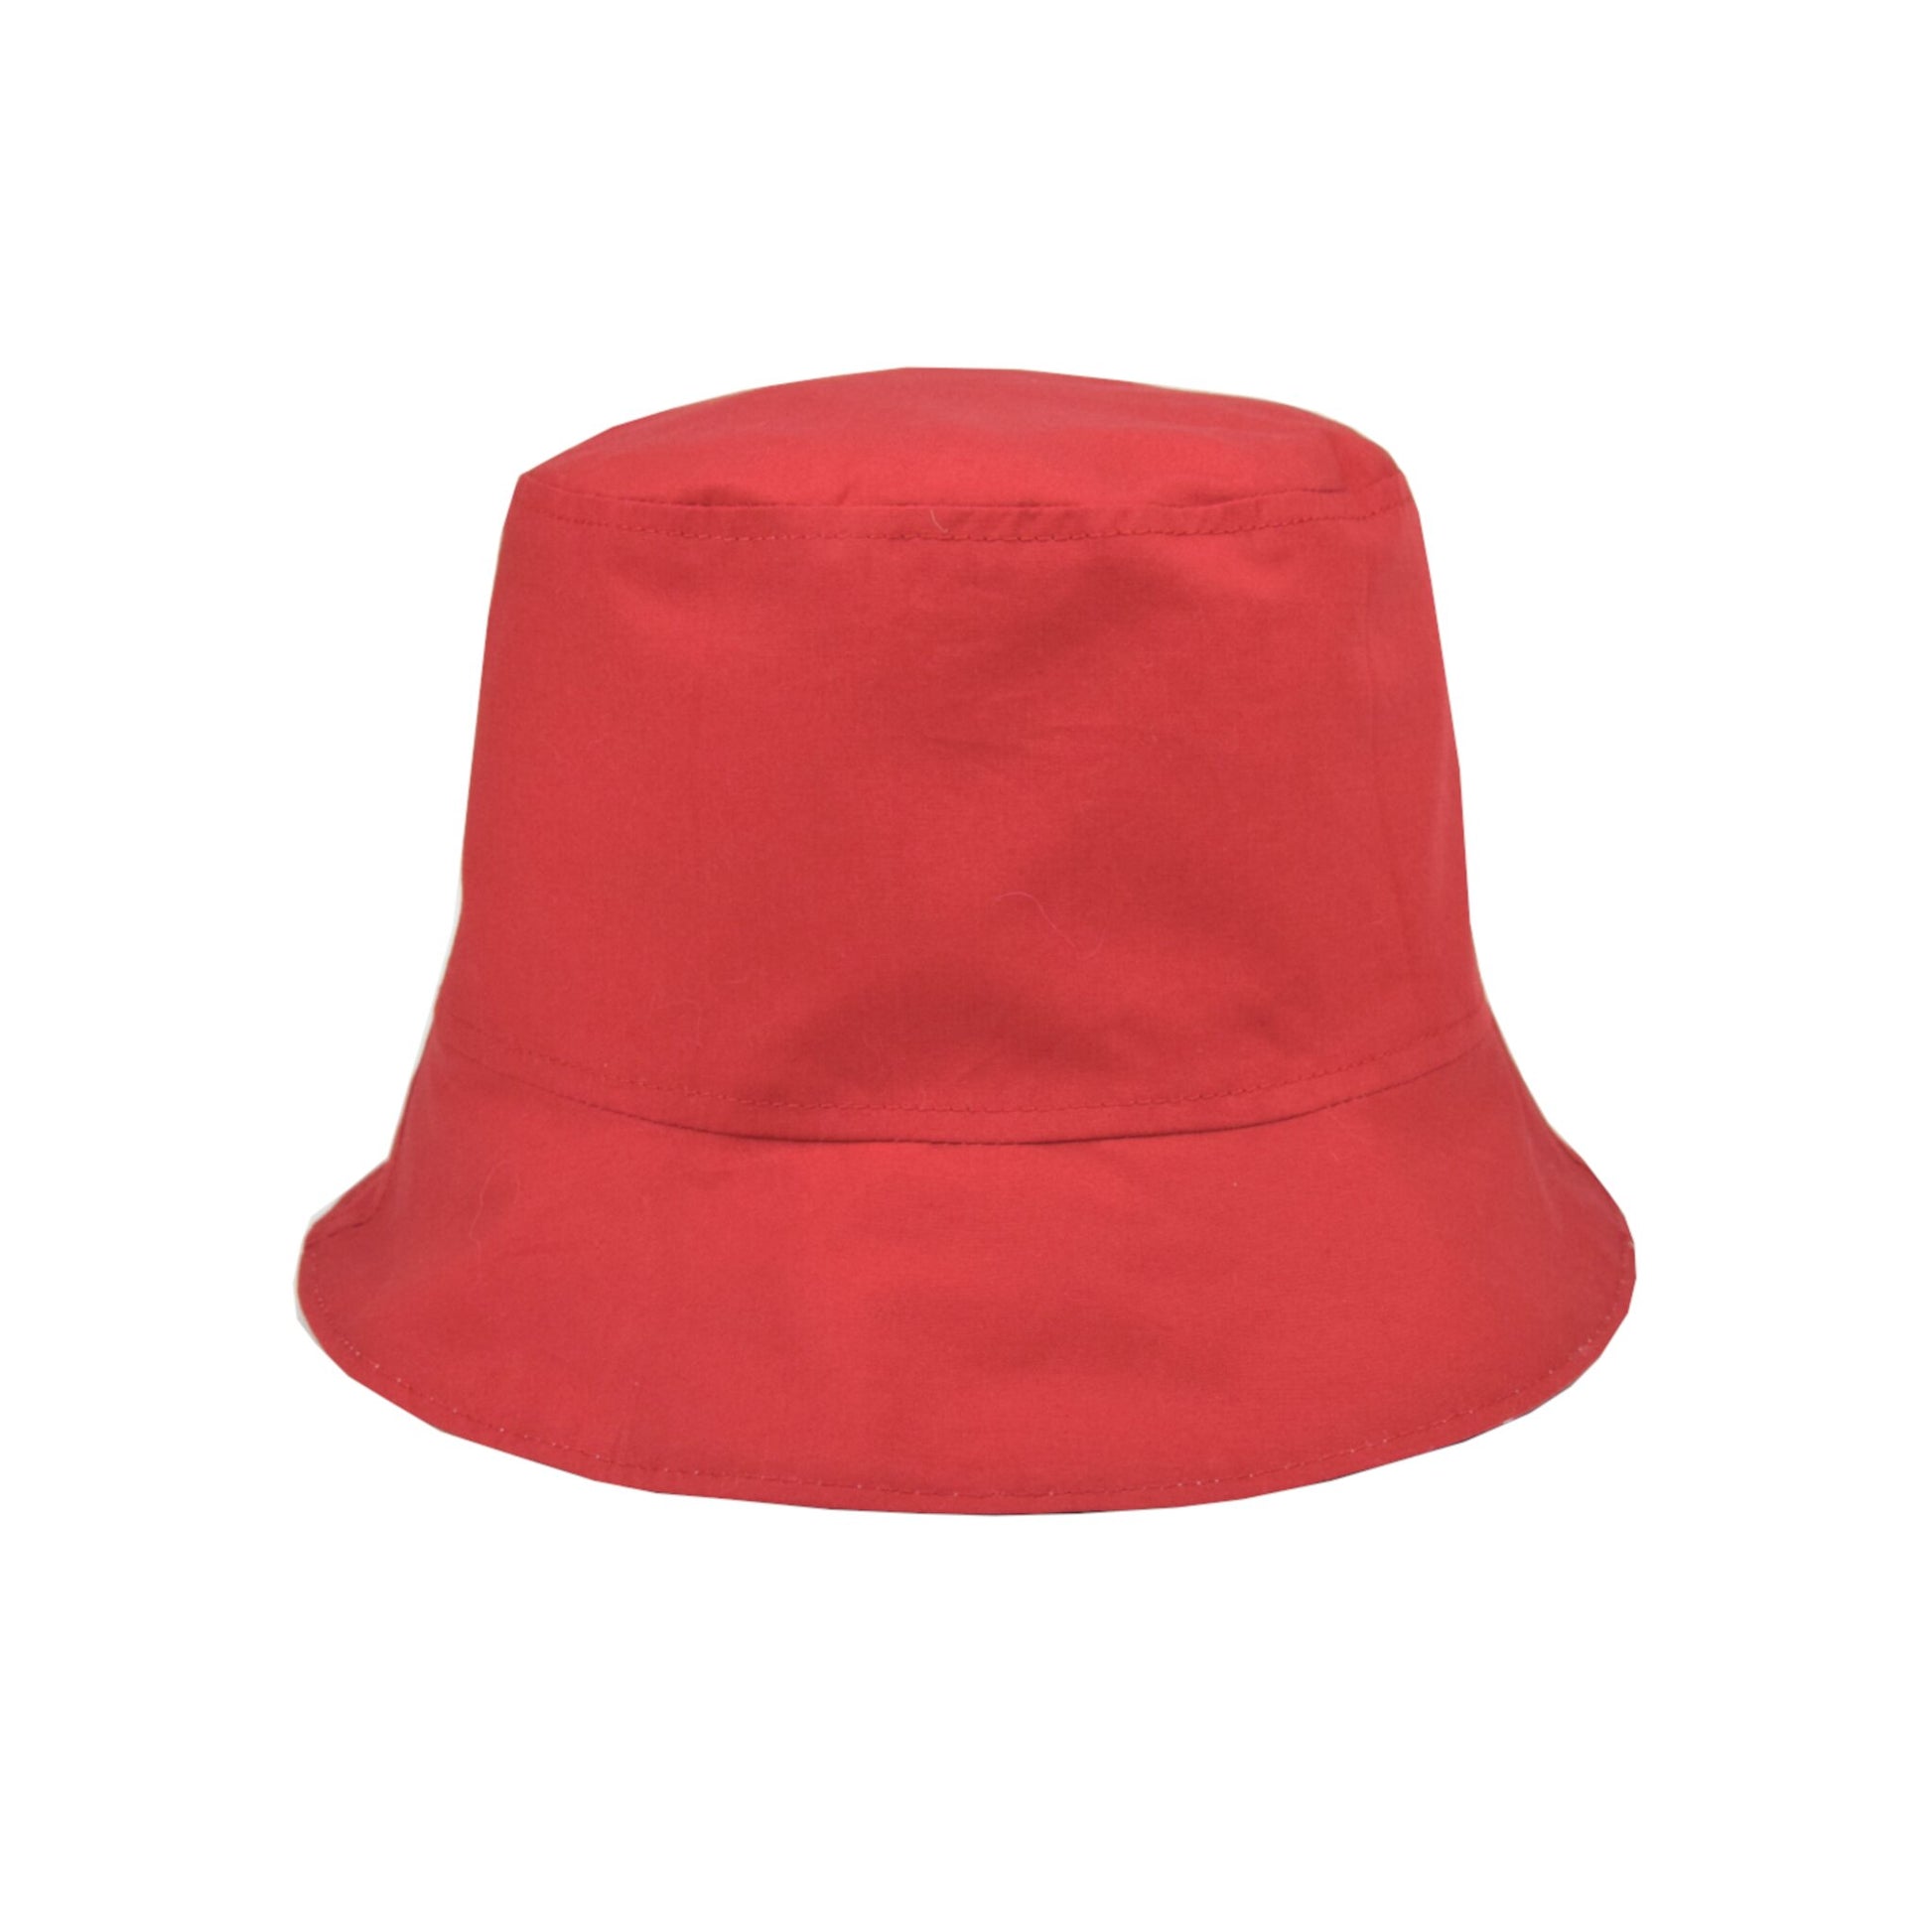 Réversible upcycling hat for kids red